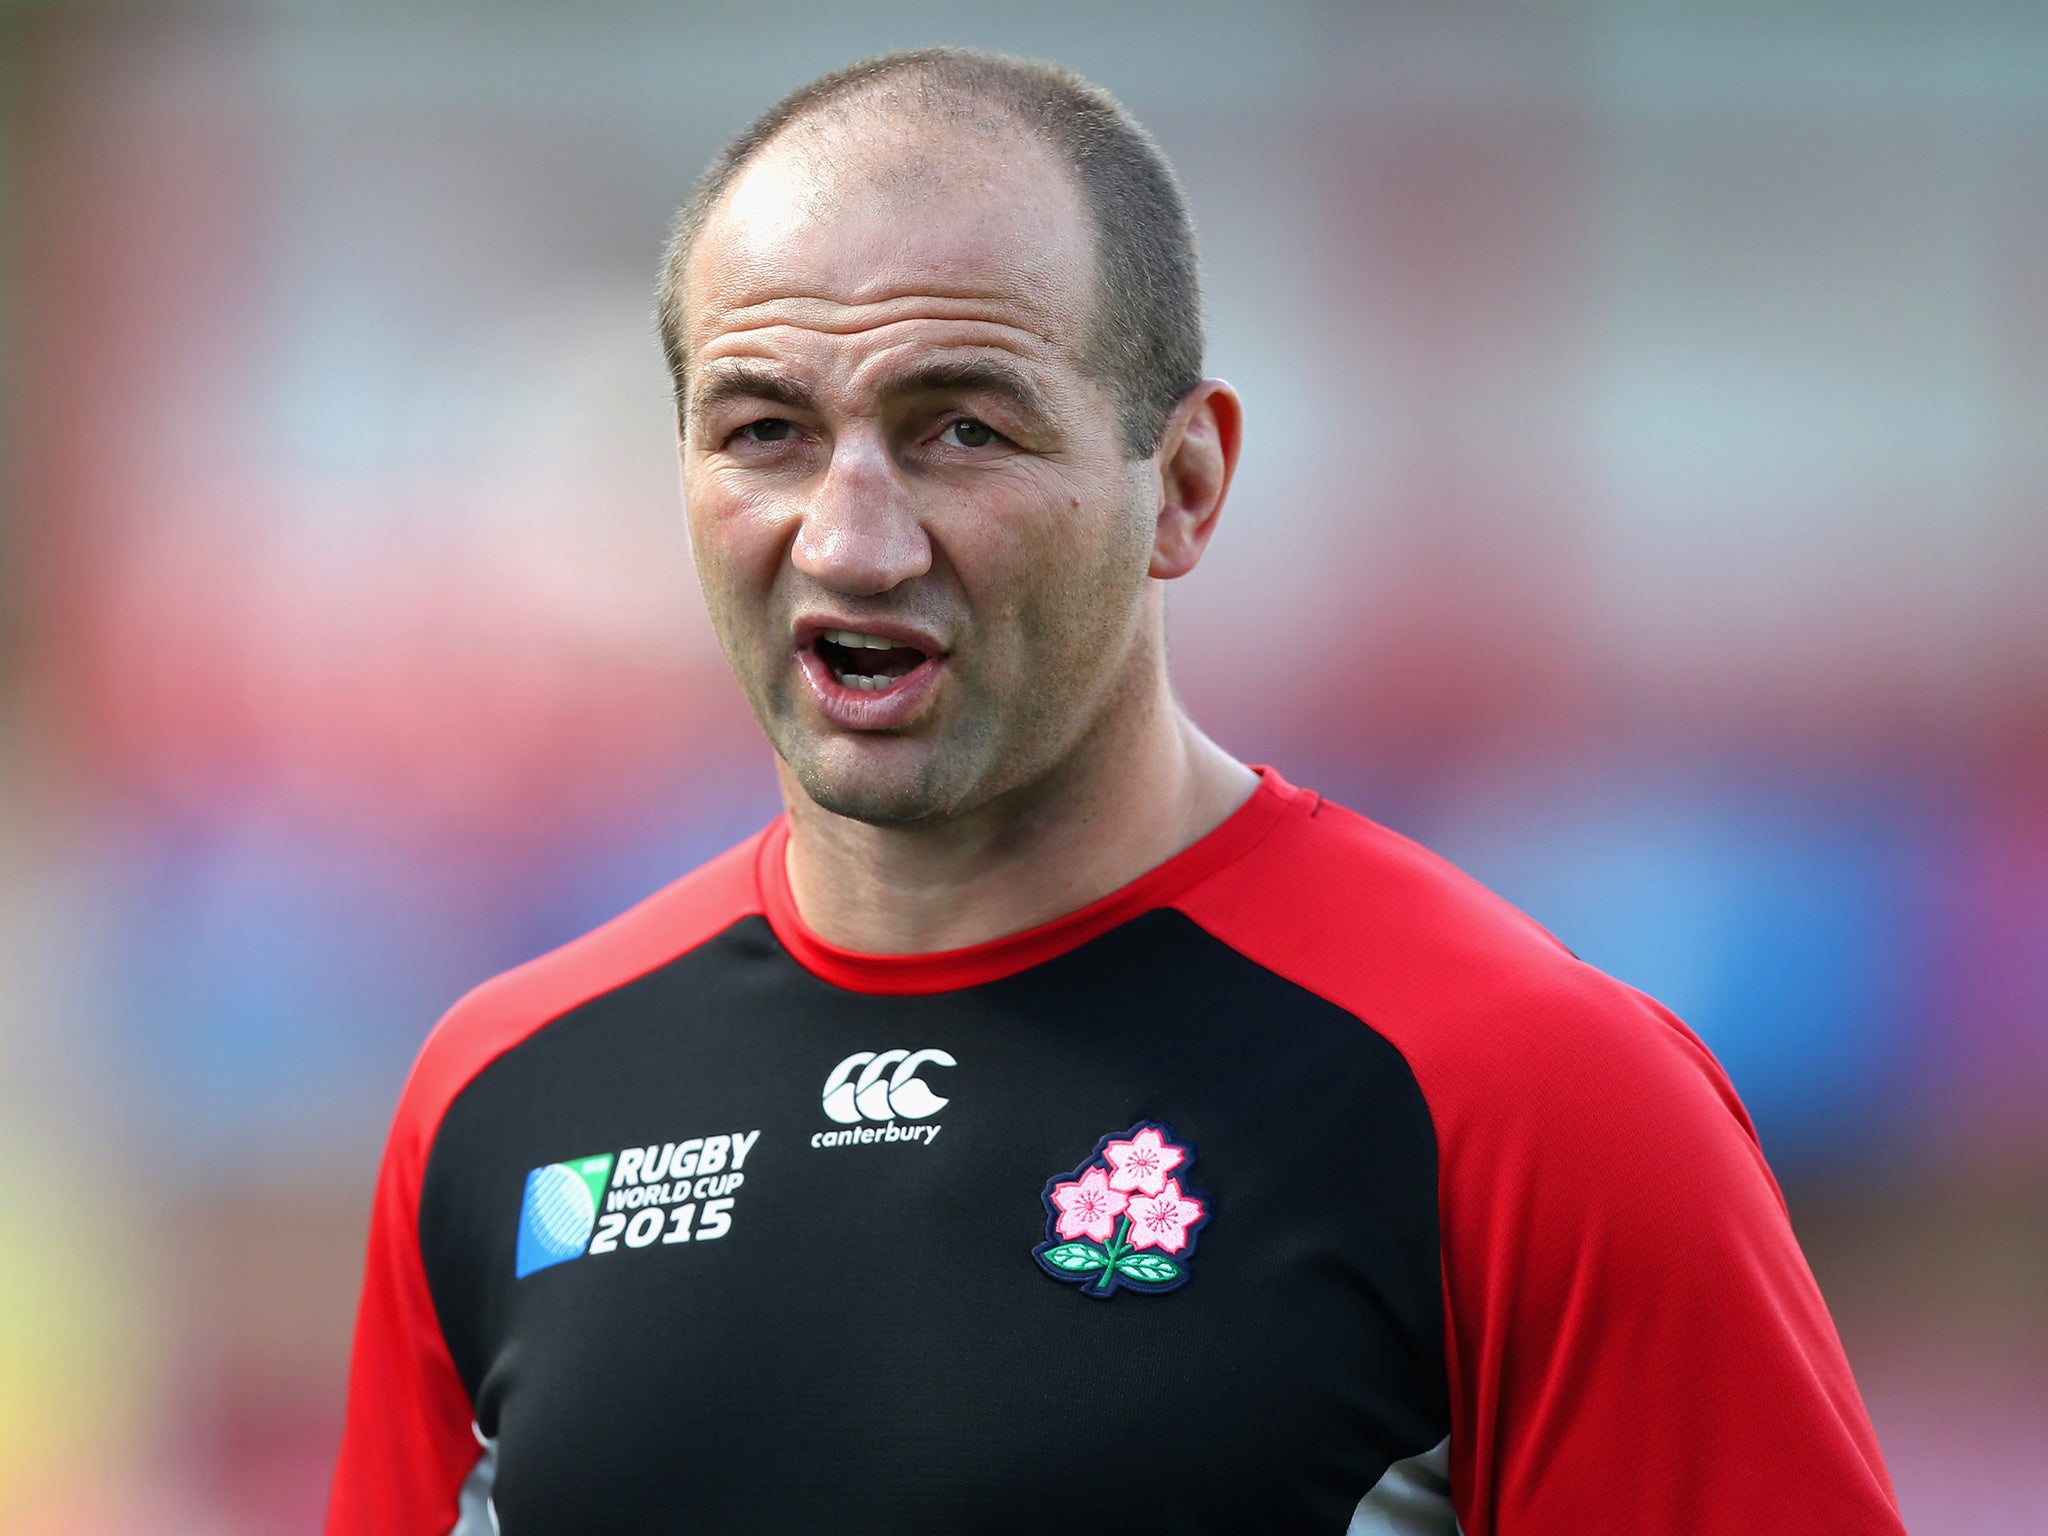 Steve Borthwick, a former England captain, could join up with a new coaching team under Jones